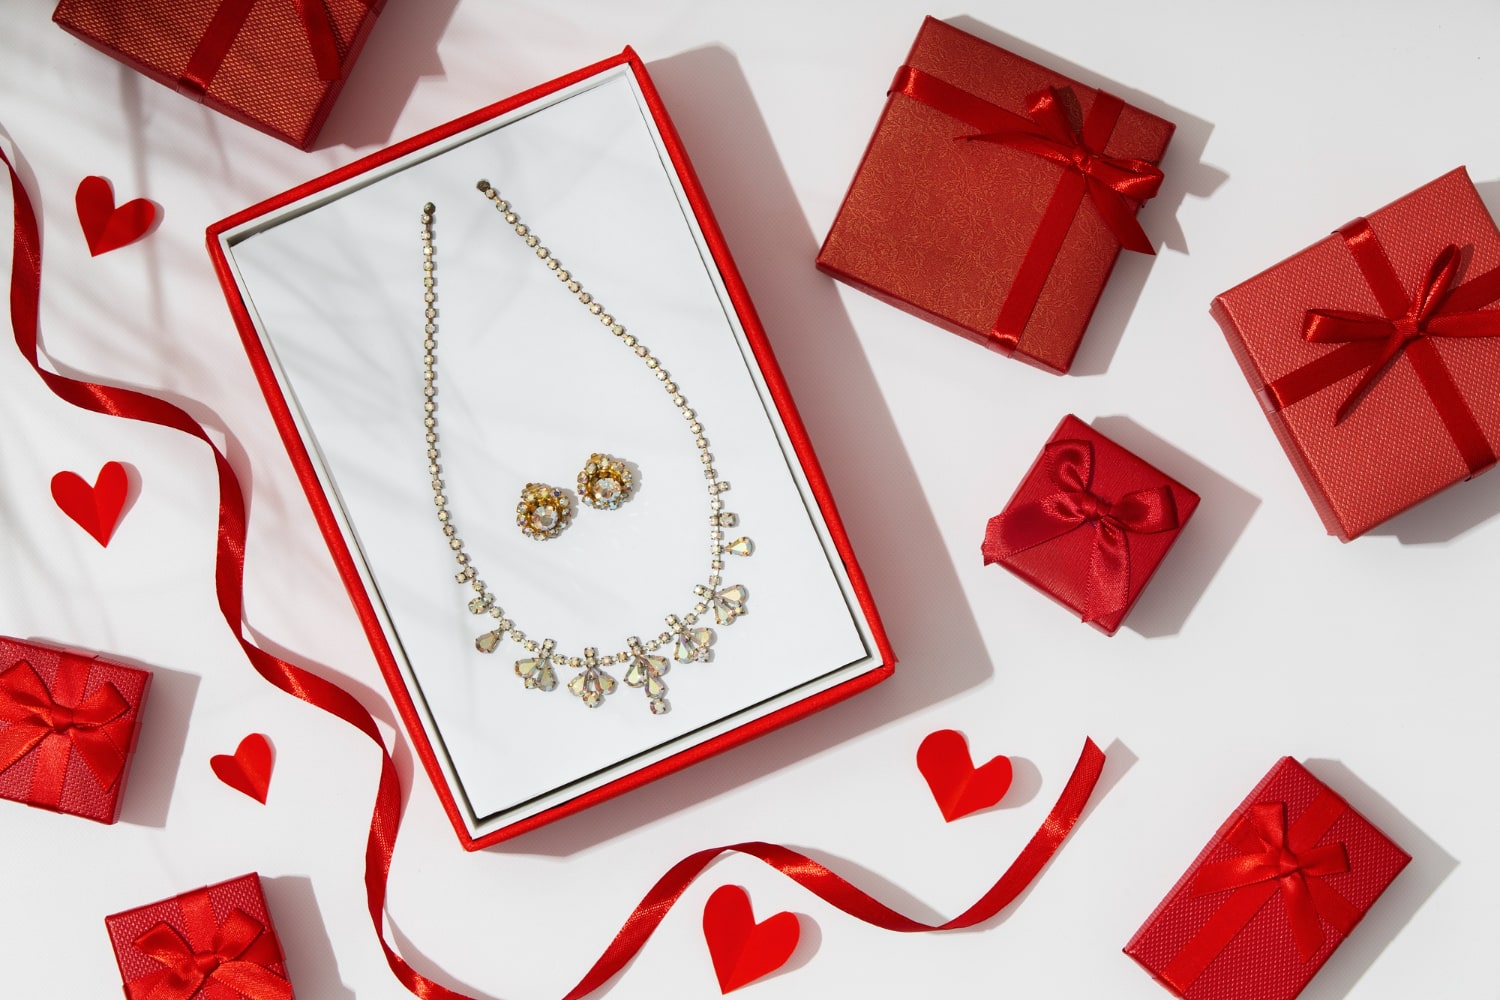 Dazzling red box with stunning necklace and earrings—perfect Chinese New Year gifts